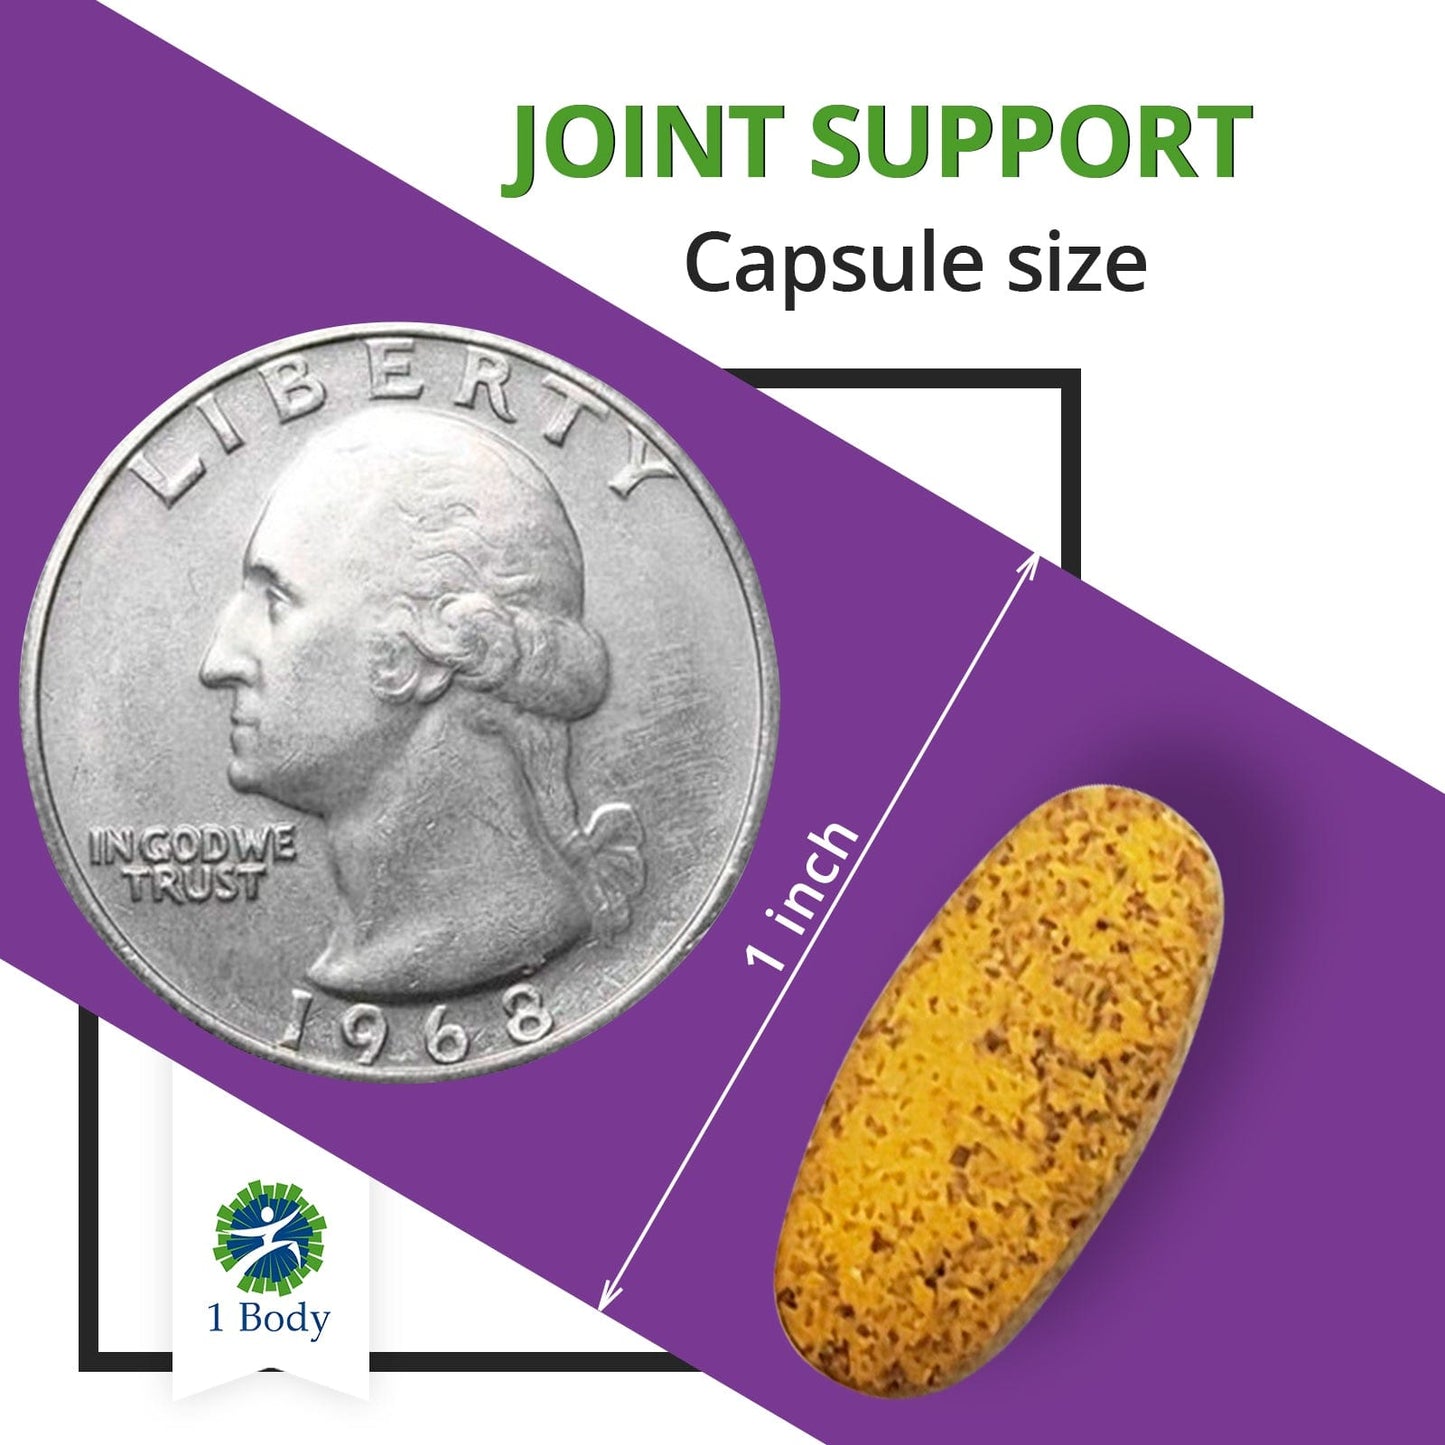 Joint Support Supplement 